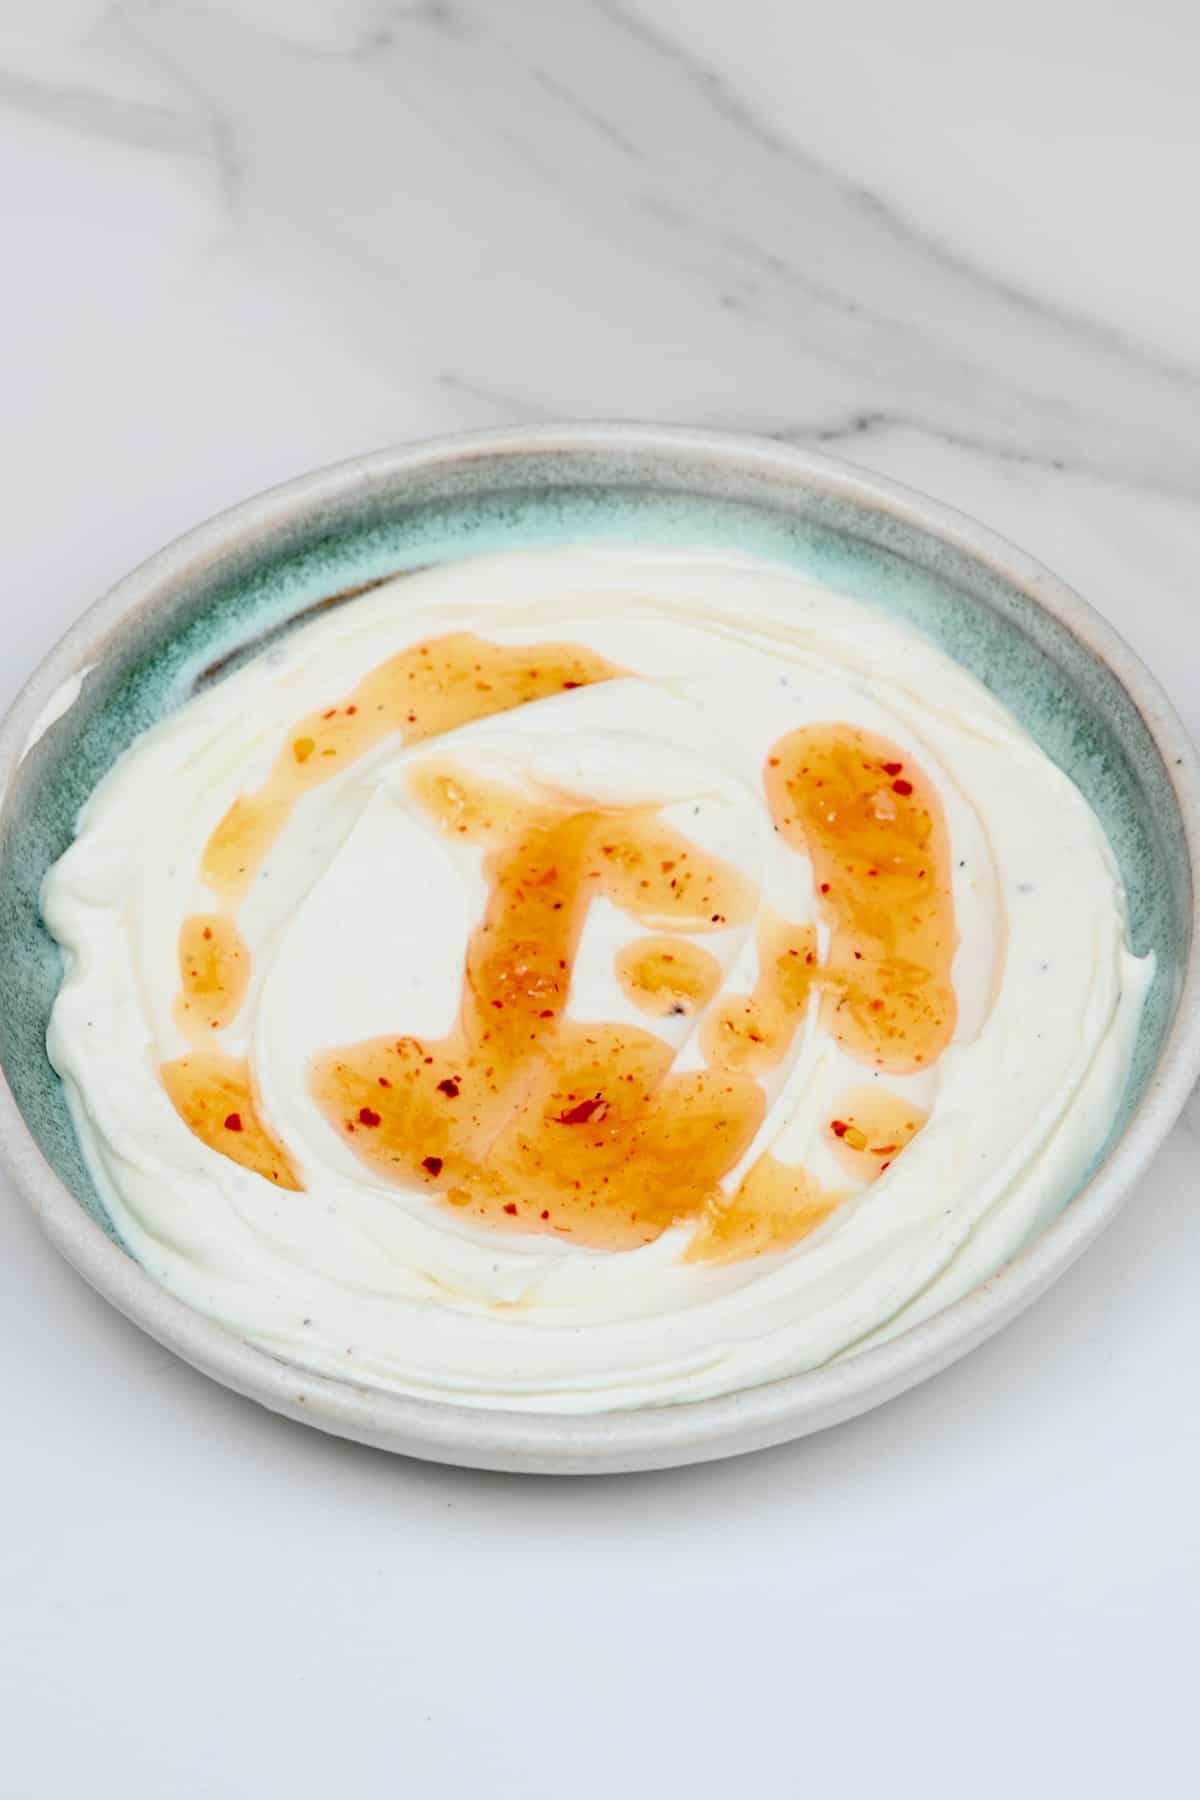 Whipped cheese topped with chili honey